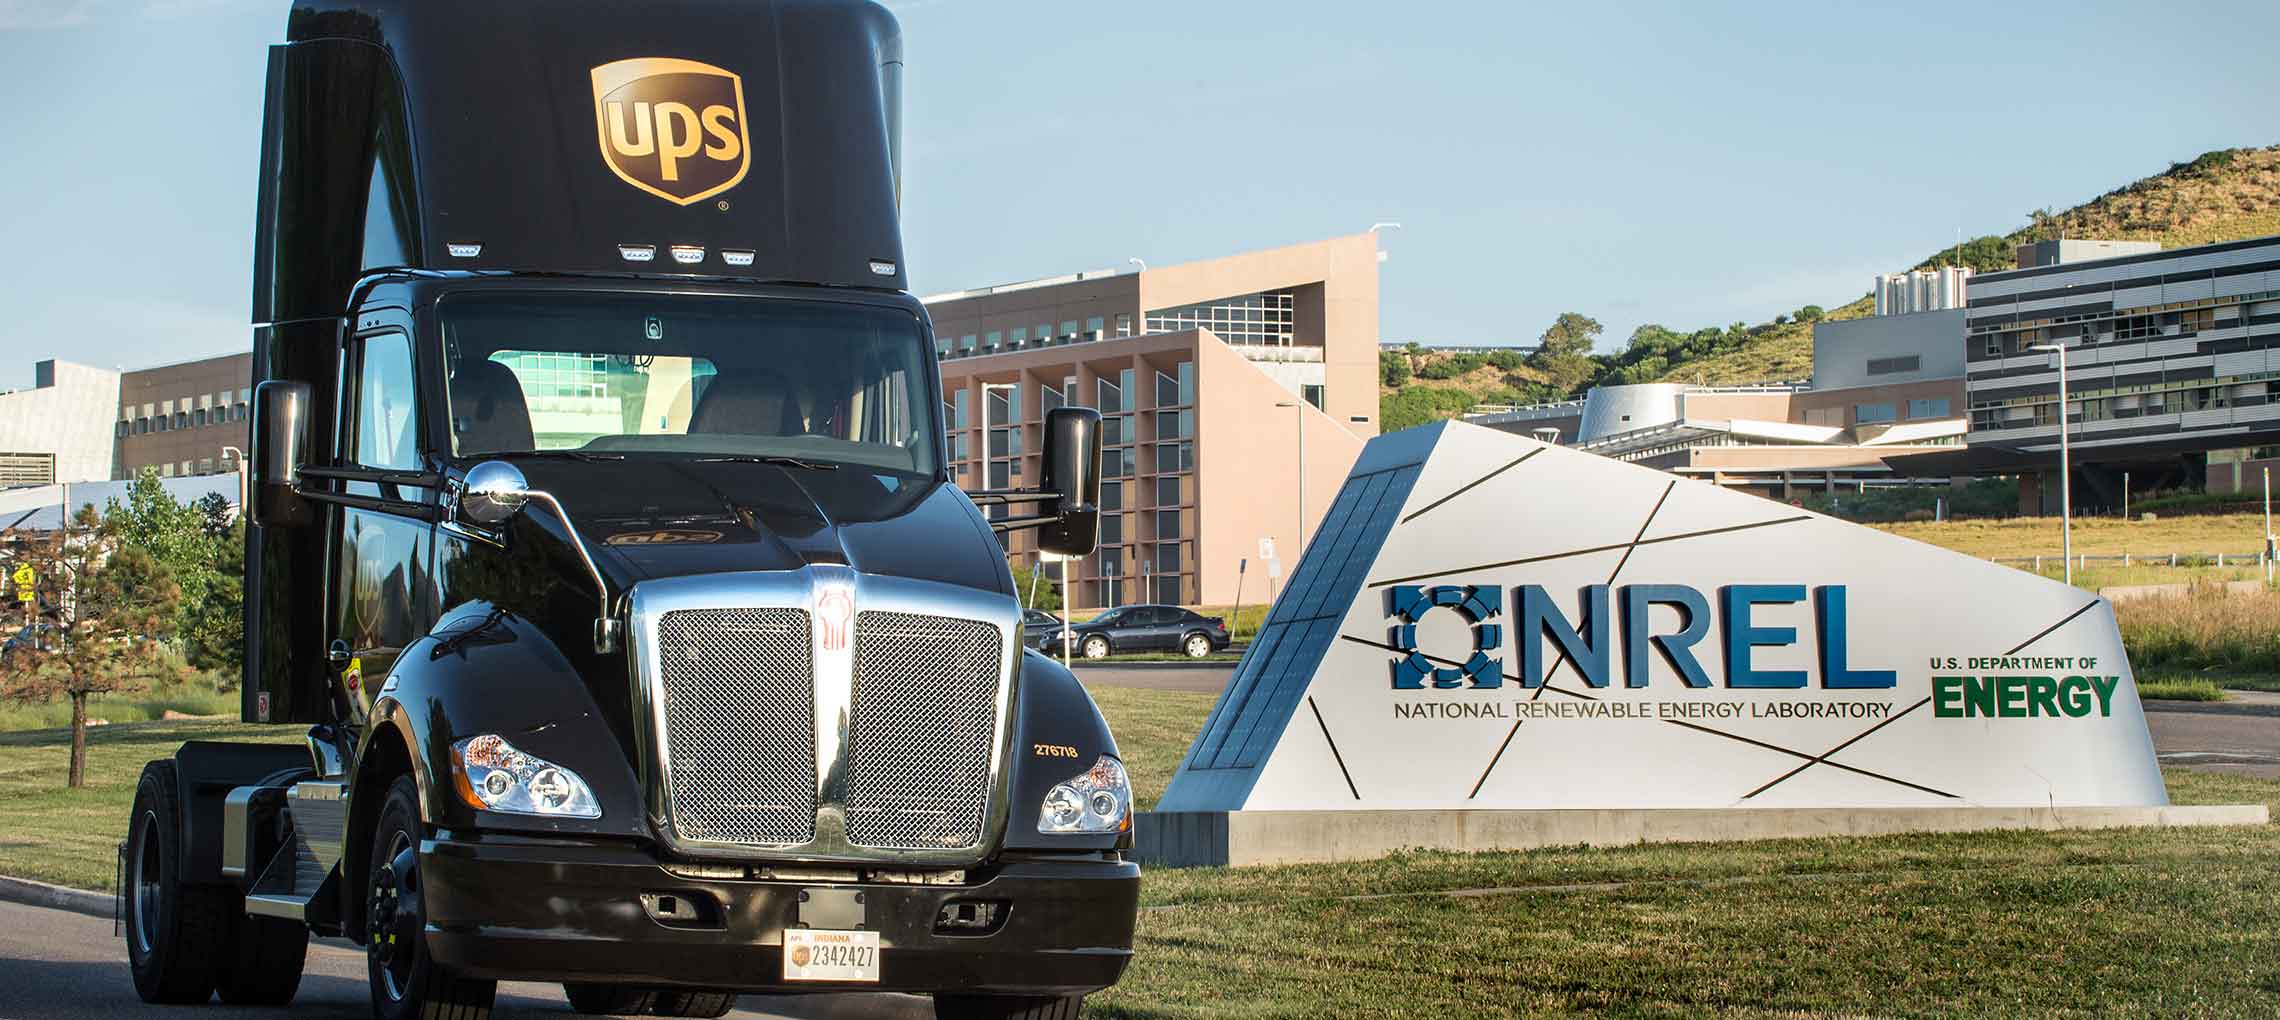 Photo of a UPS heavy-duty truck by the NREL entrance sign.